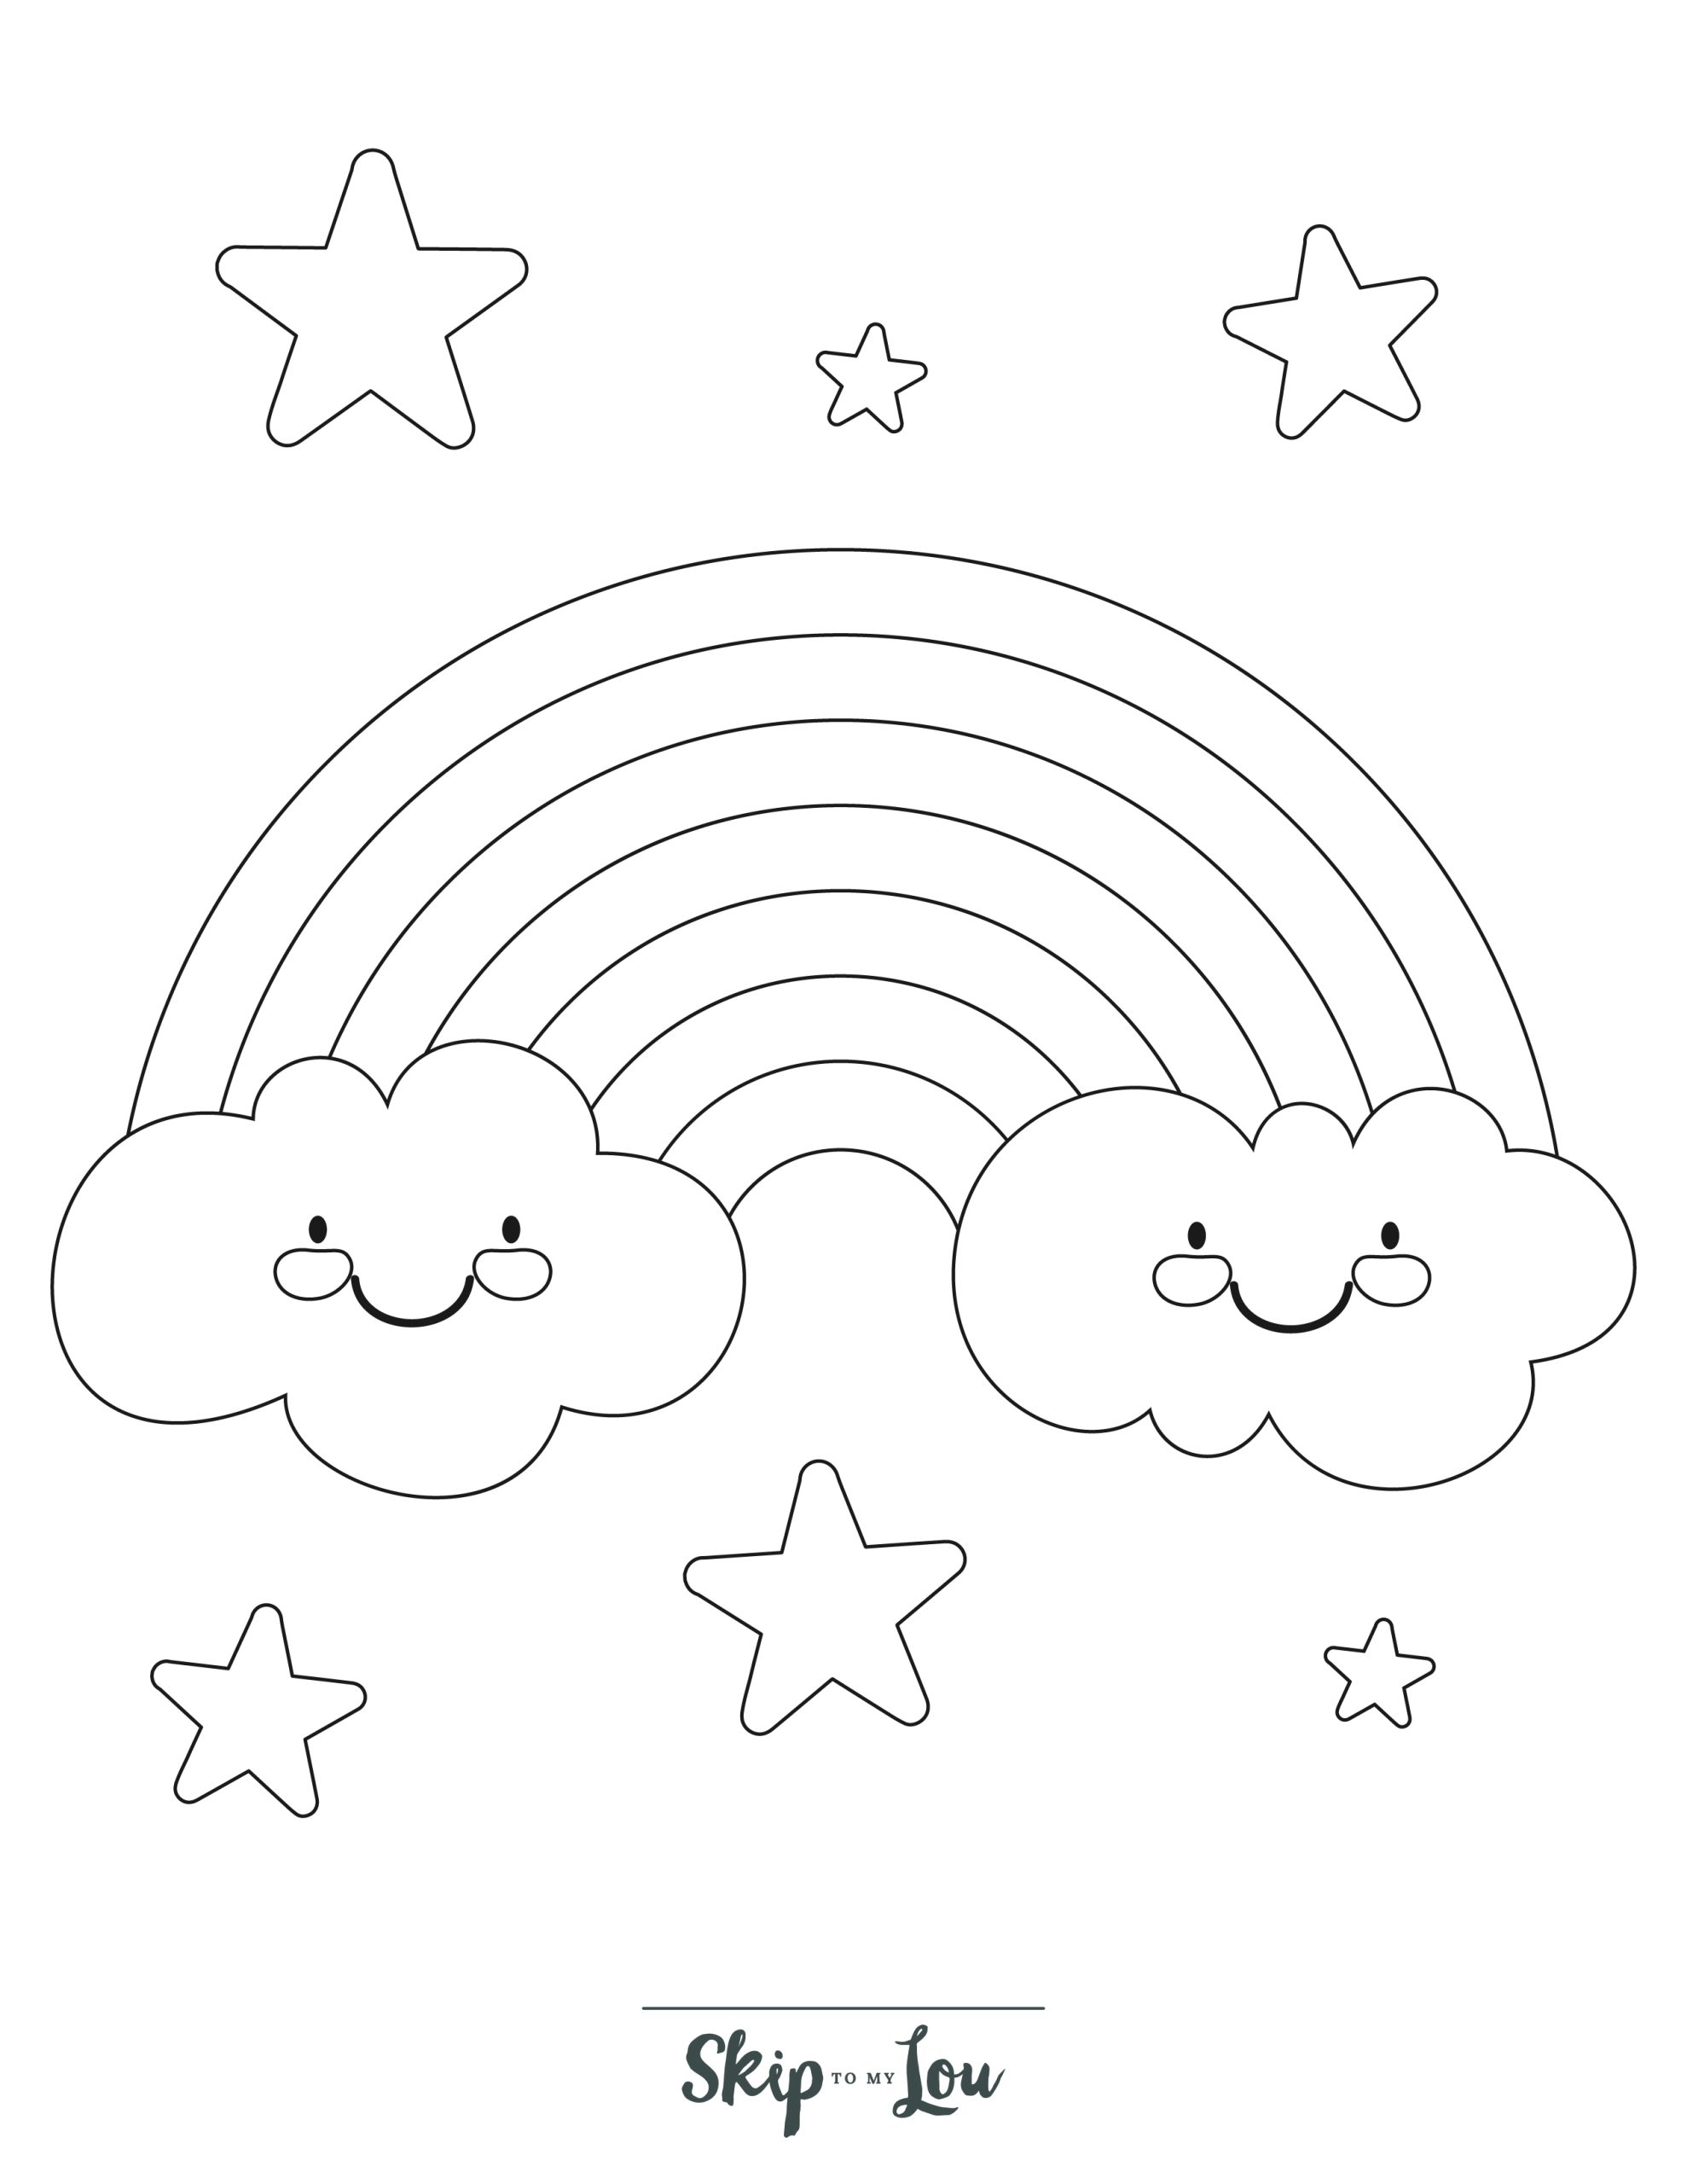 Preschool Coloring Page 8 - Simple line drawing of rainbow with two clouds